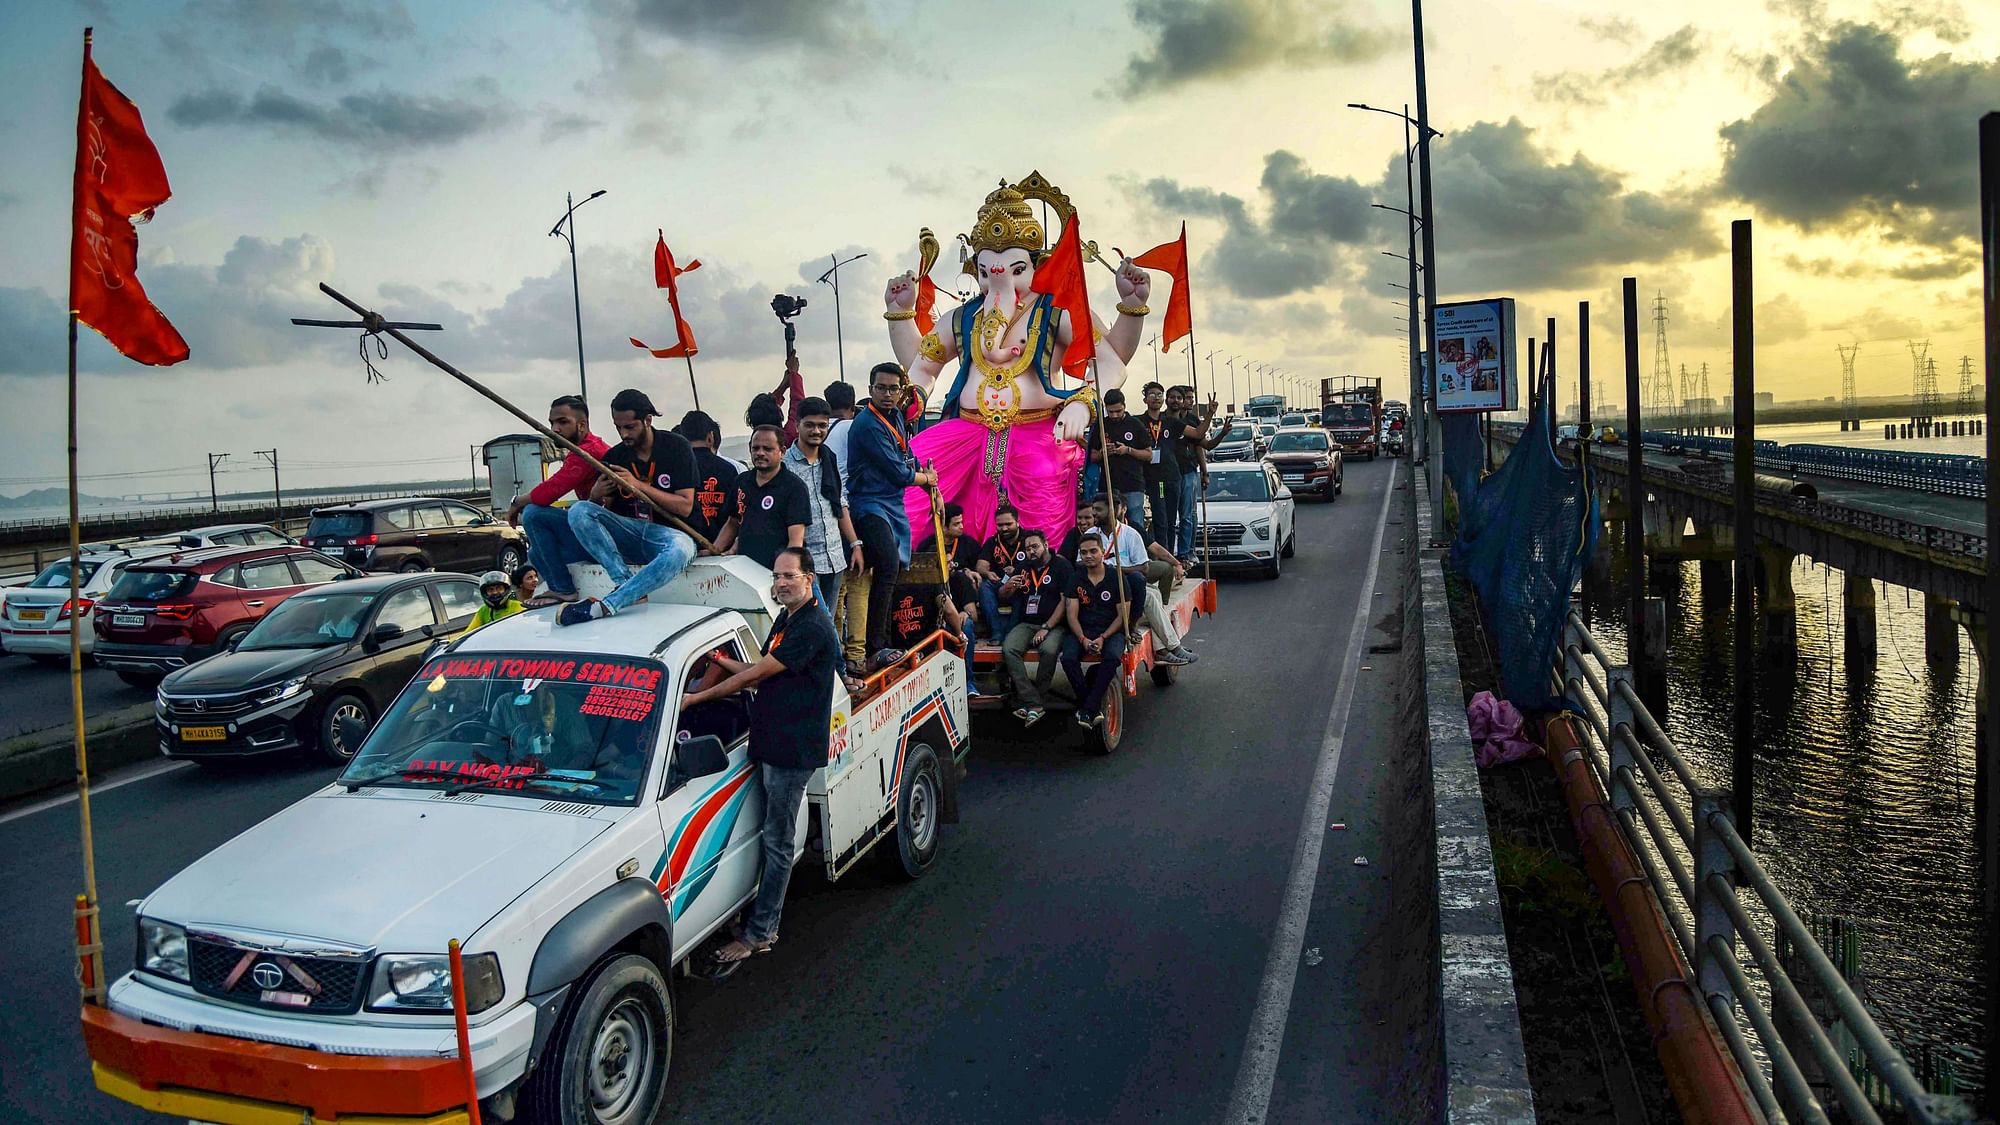 <div class="paragraphs"><p>Devotees carry an idol of Lord Ganesh during a procession ahead of the Ganesh Chaturthi festival, in Navi Mumbai, Sunday, 28 August.</p></div>